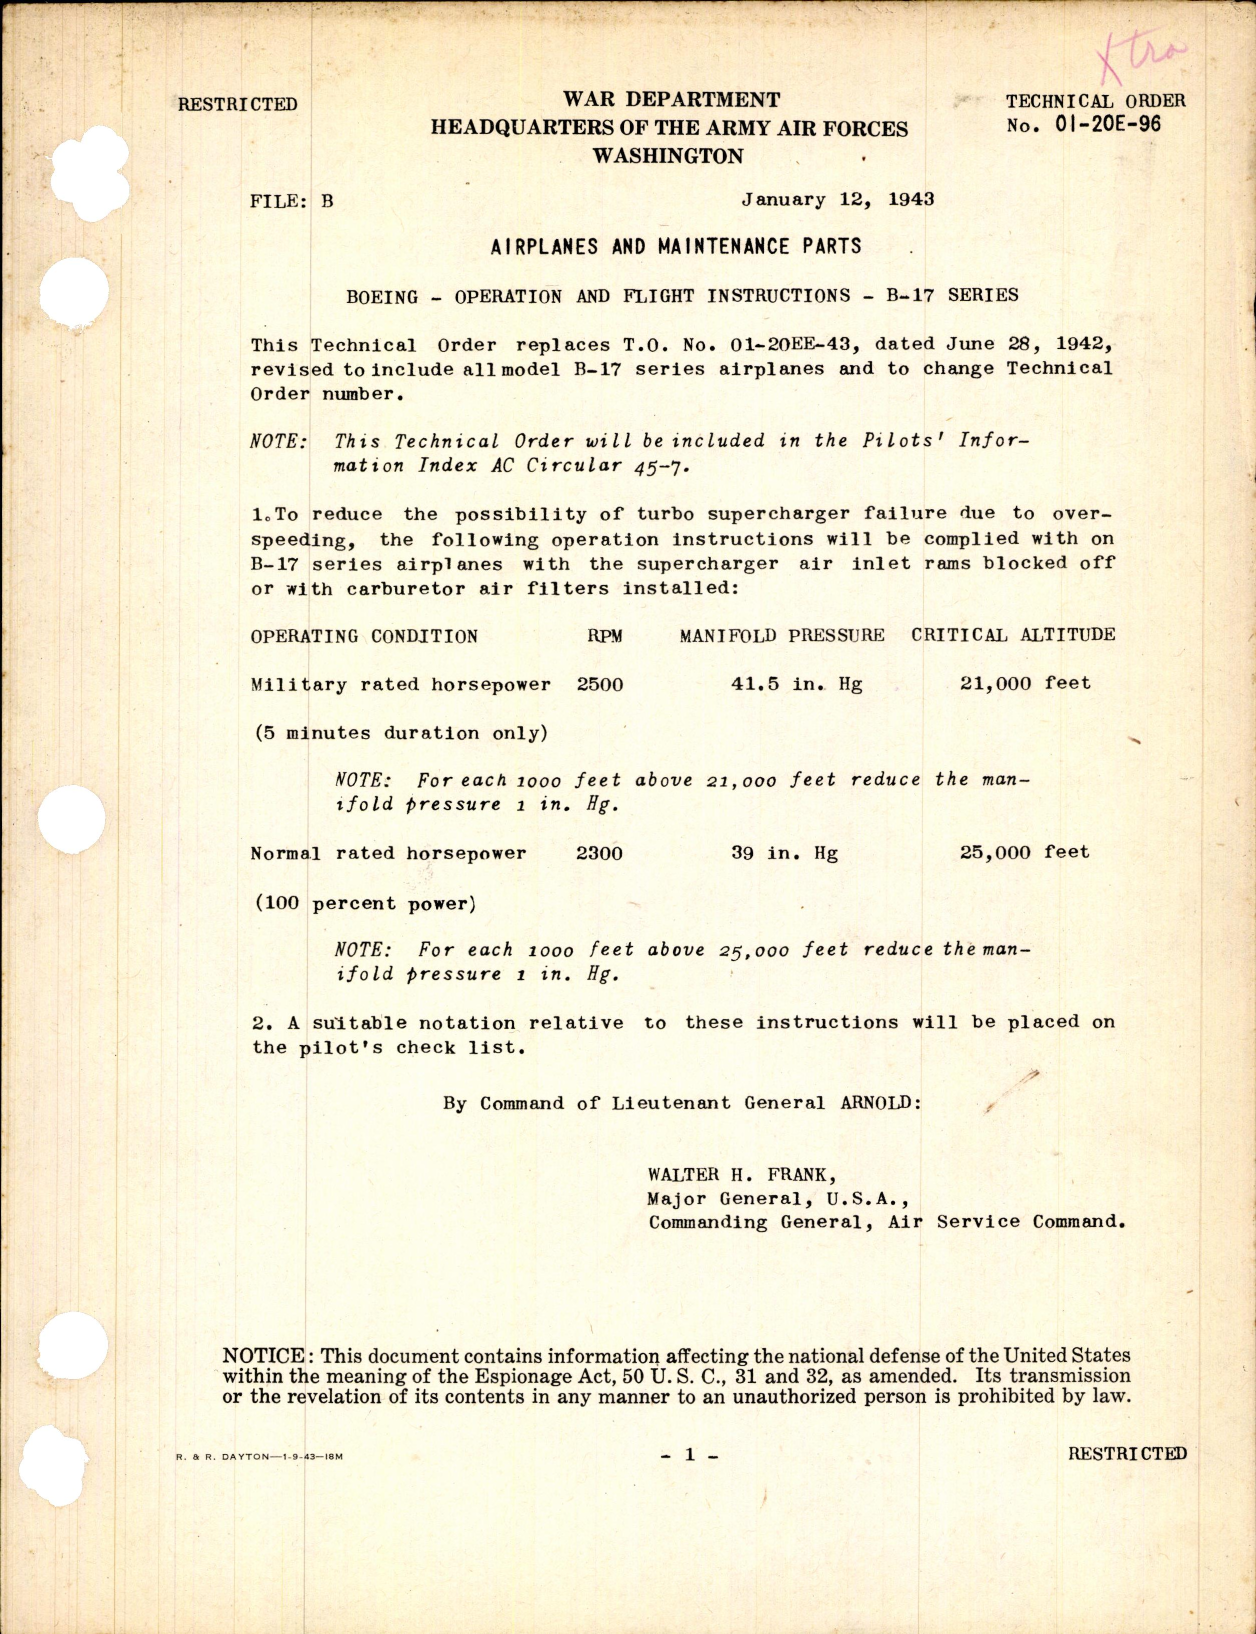 Sample page 1 from AirCorps Library document: Operation and Flight Instructions for B-17 Series